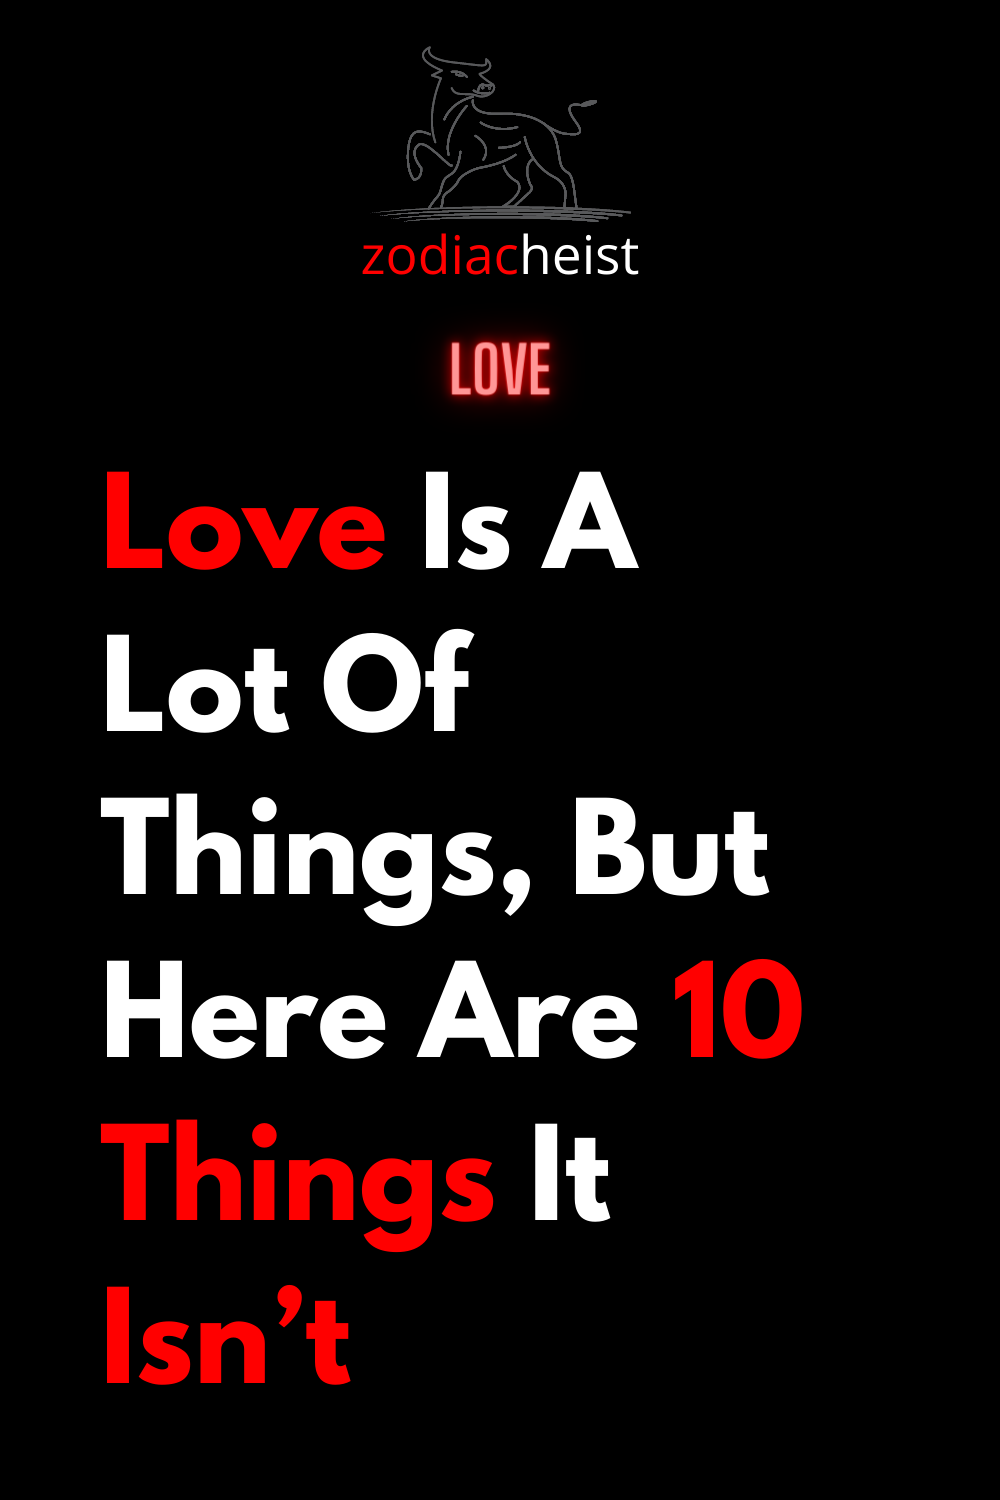 Love Is A Lot Of Things, But Here Are 10 Things It Isn’t